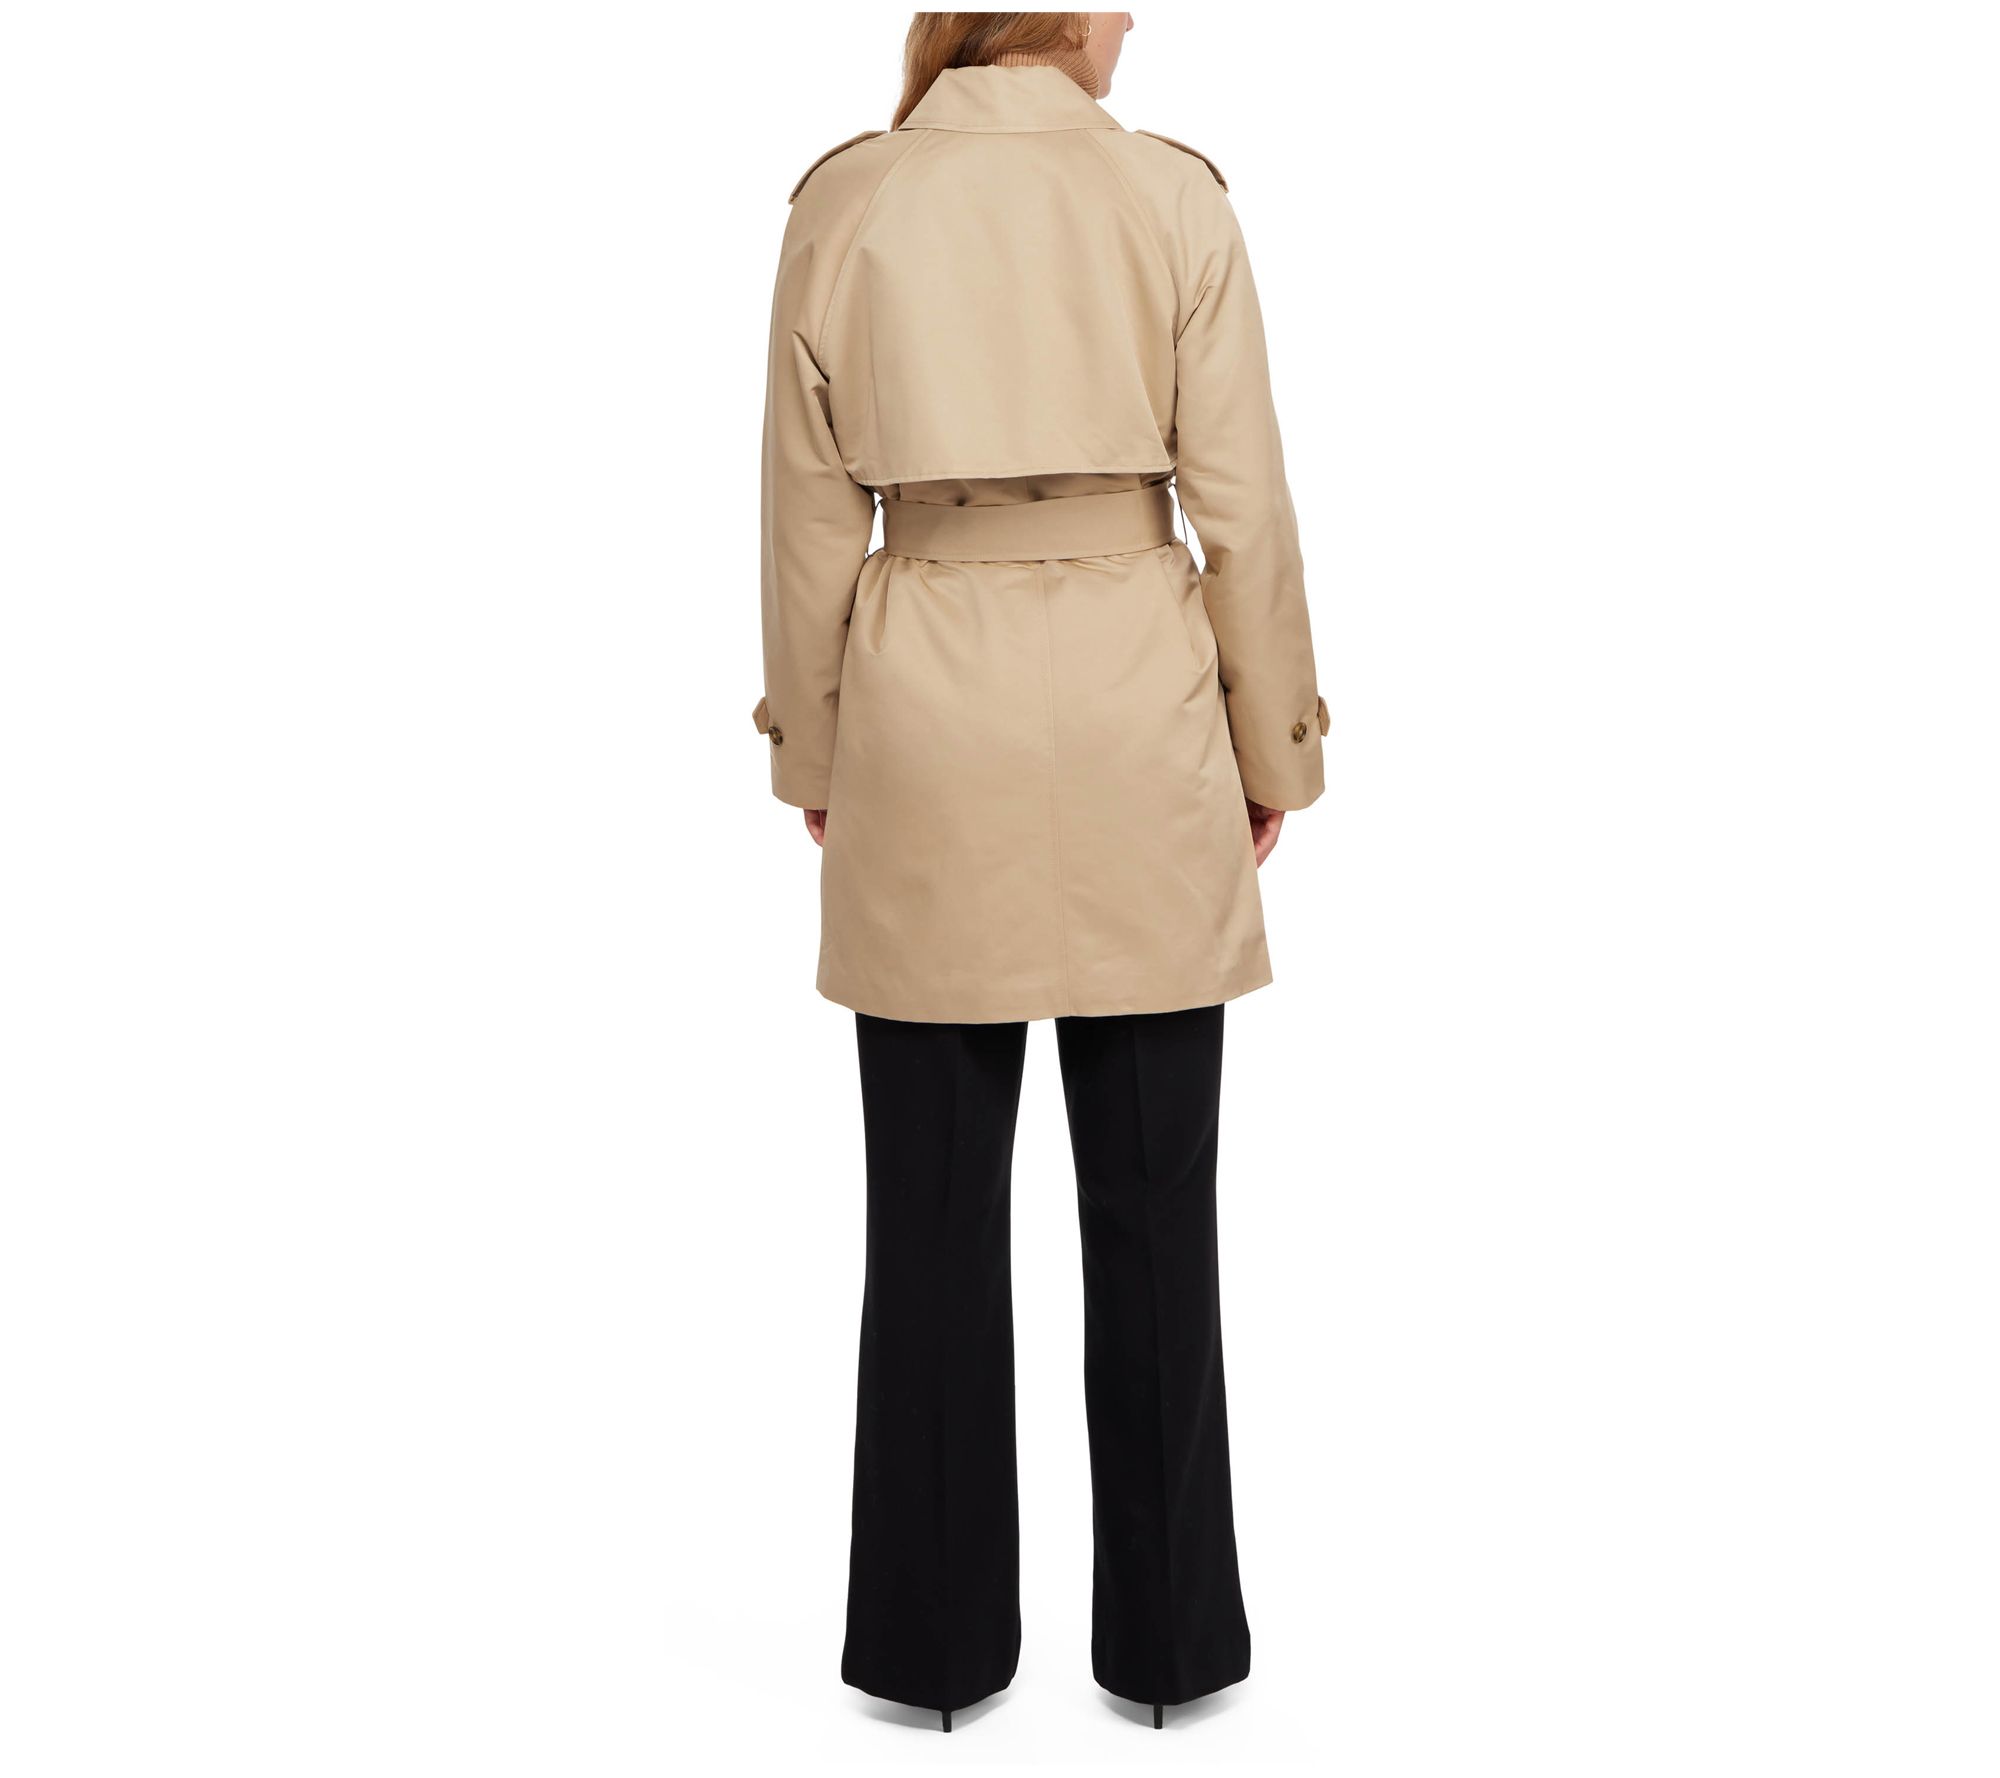 Ellen Tracy Women's Classic Trench with Polyfill Insulation - QVC.com